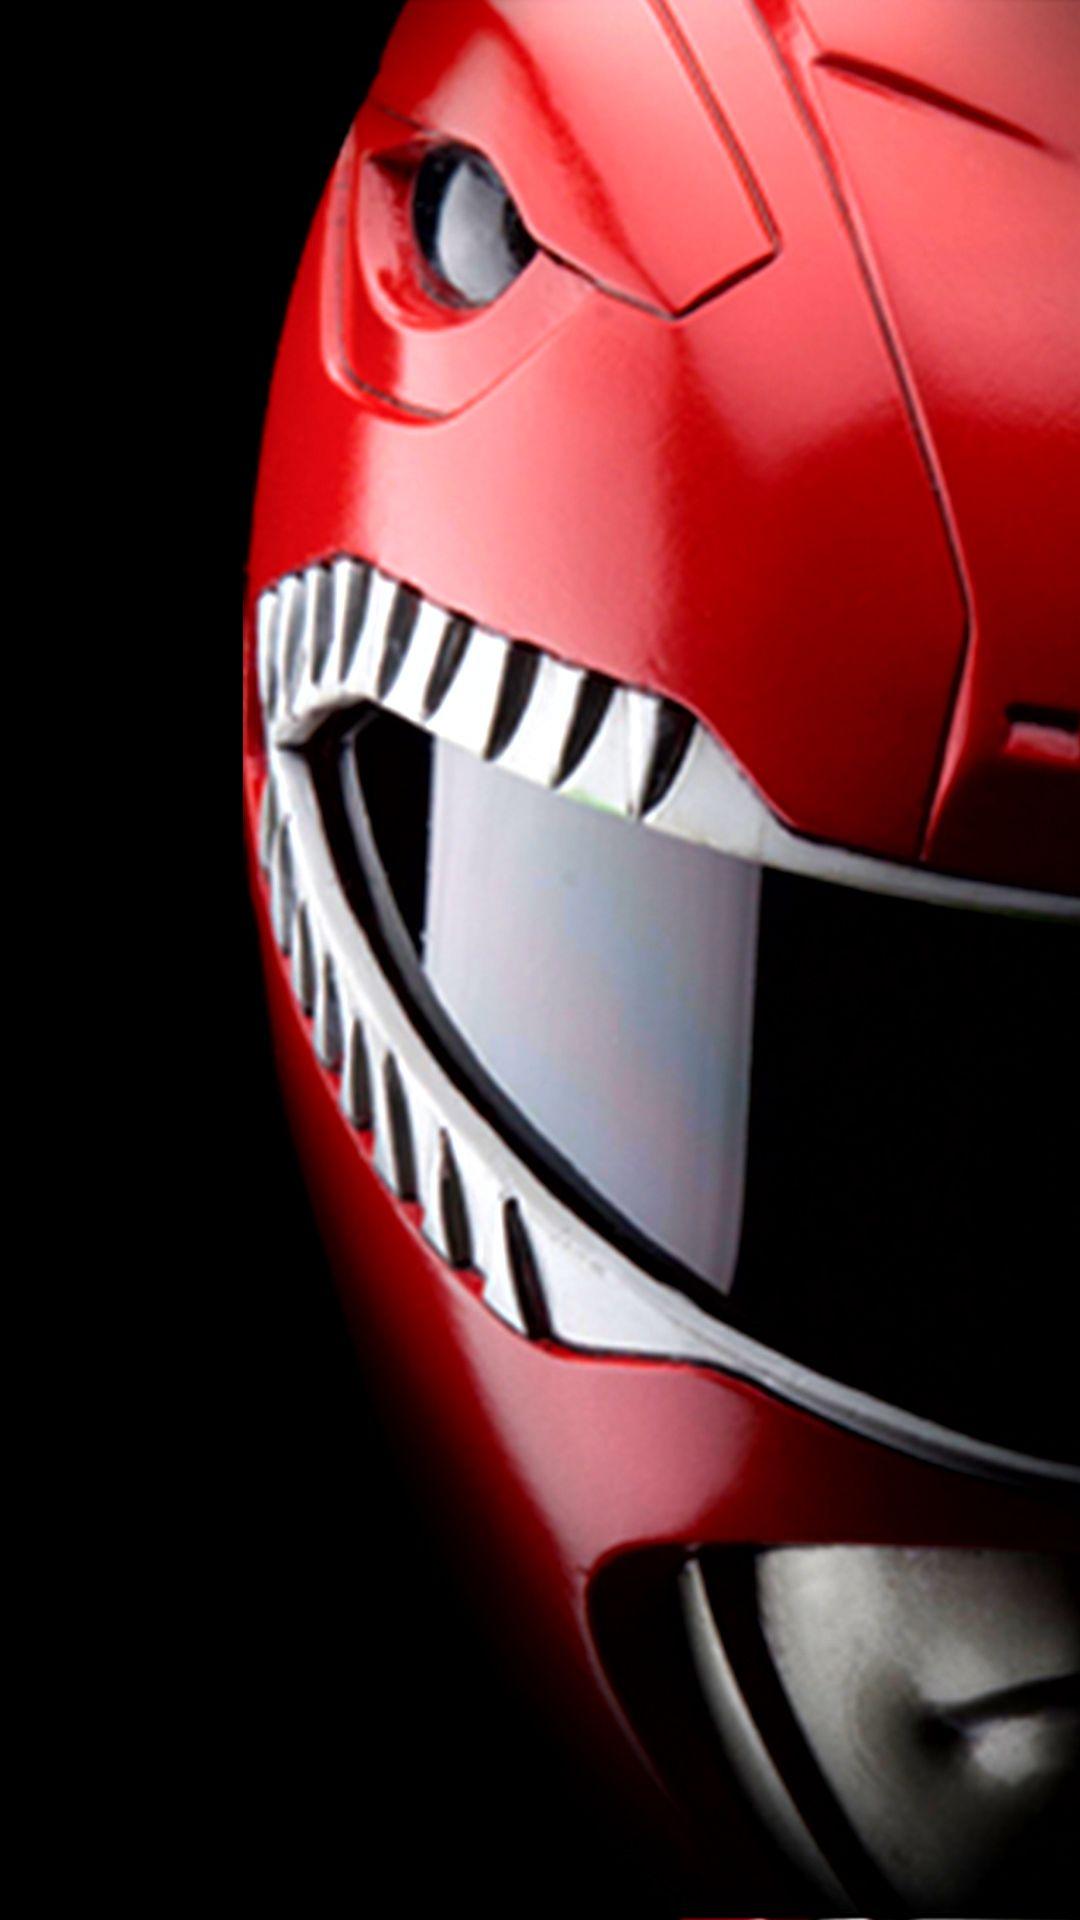 Power Rangers HD Android Wallpaper